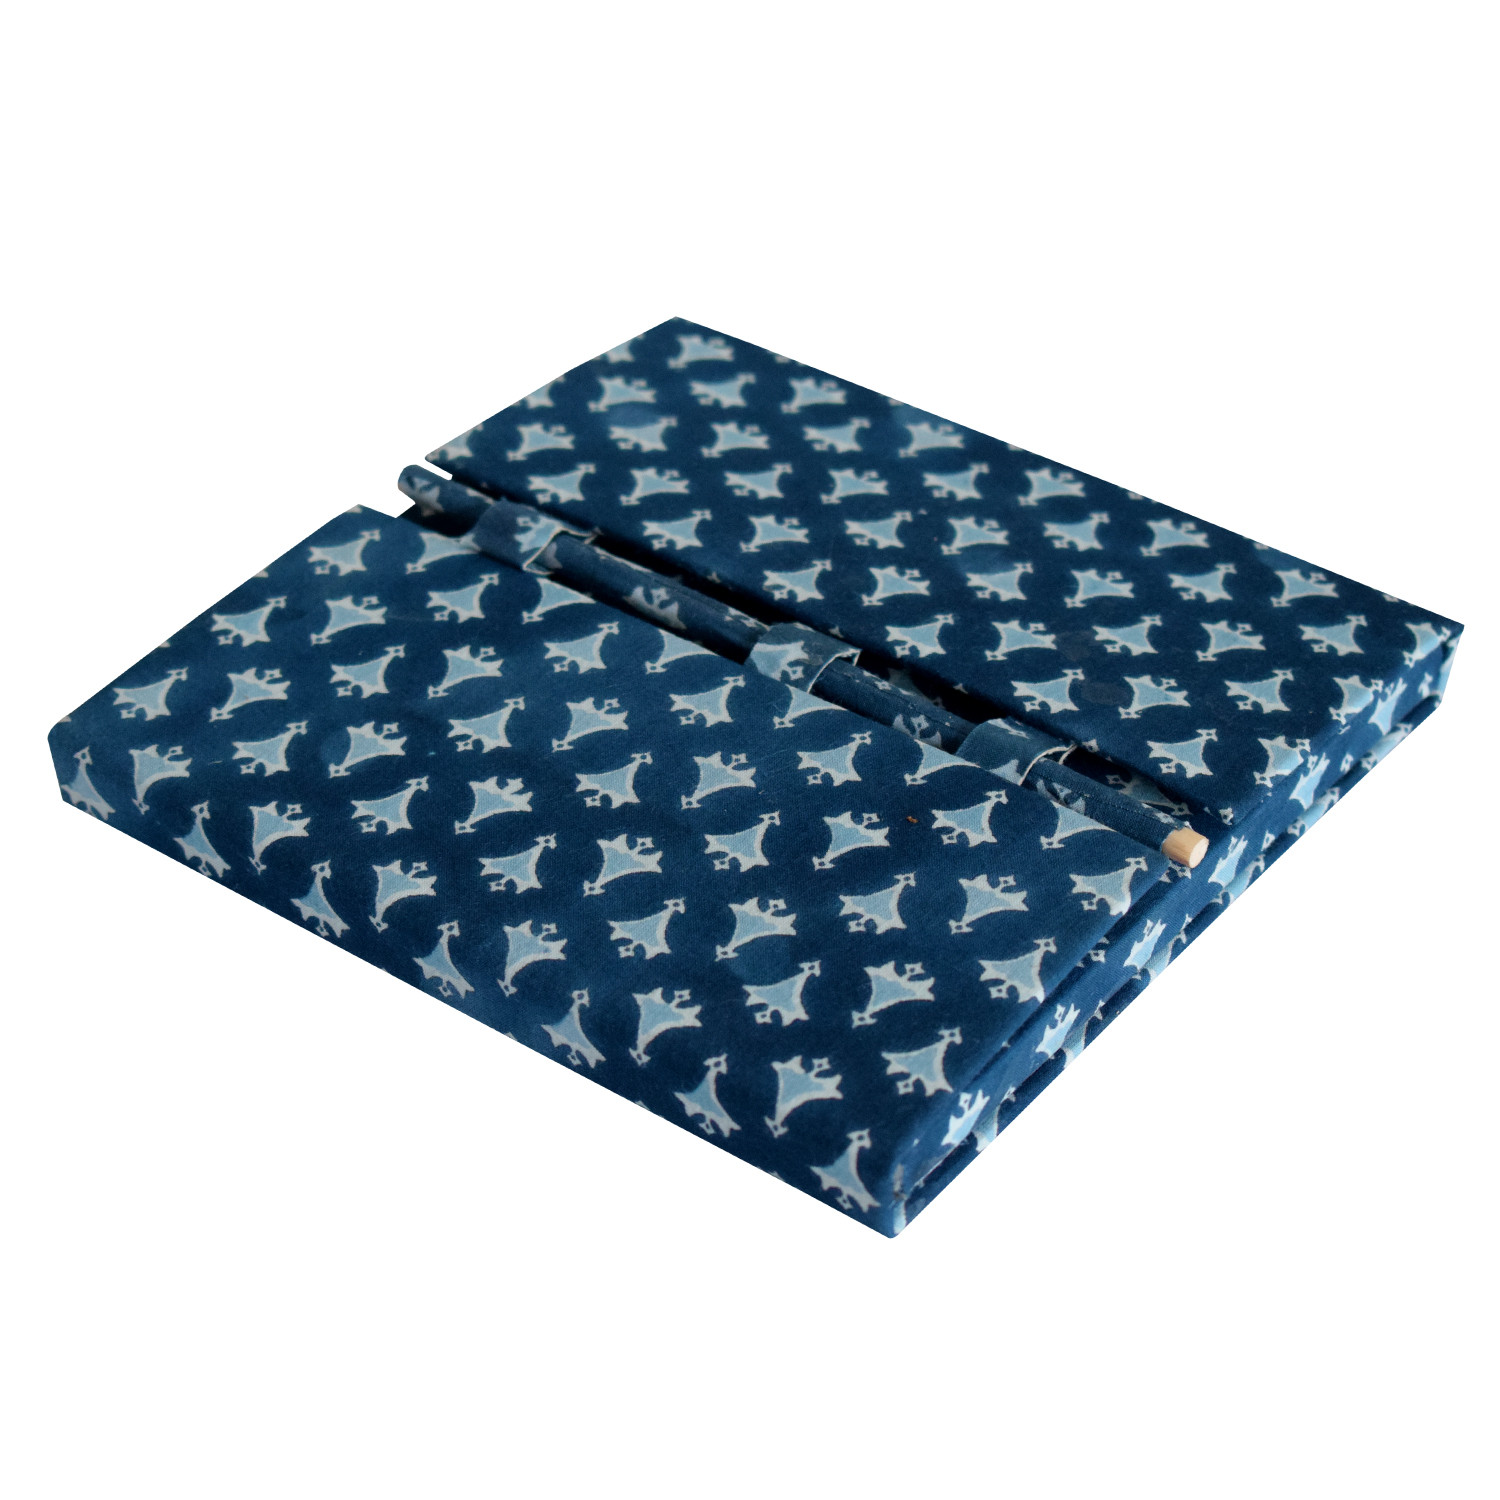 Kuber Industries Buti Print Handicraft Notebook/Diary With Lock System for Home, Traveling, Office (Blue)